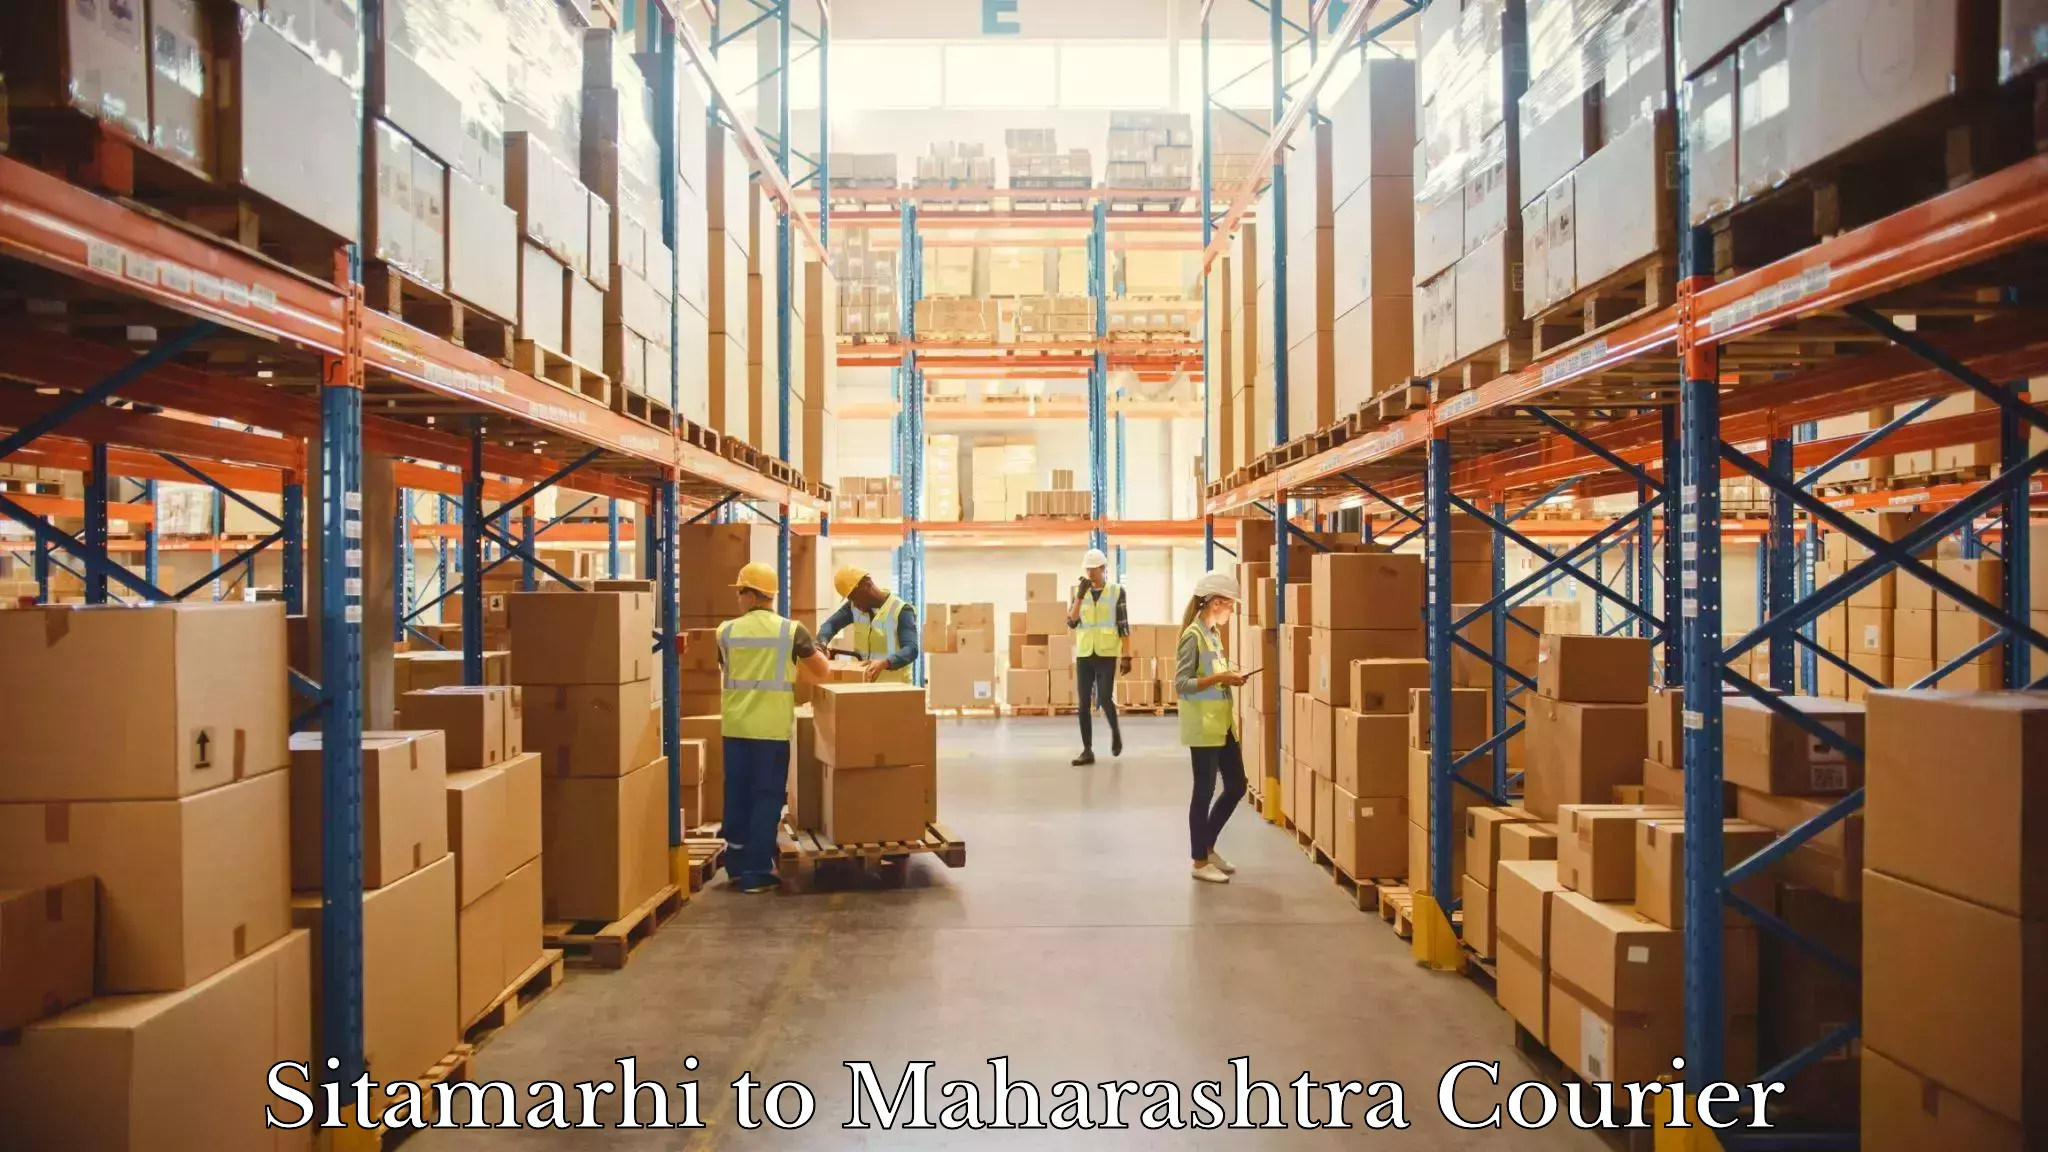 Efficient courier operations in Sitamarhi to Maharashtra